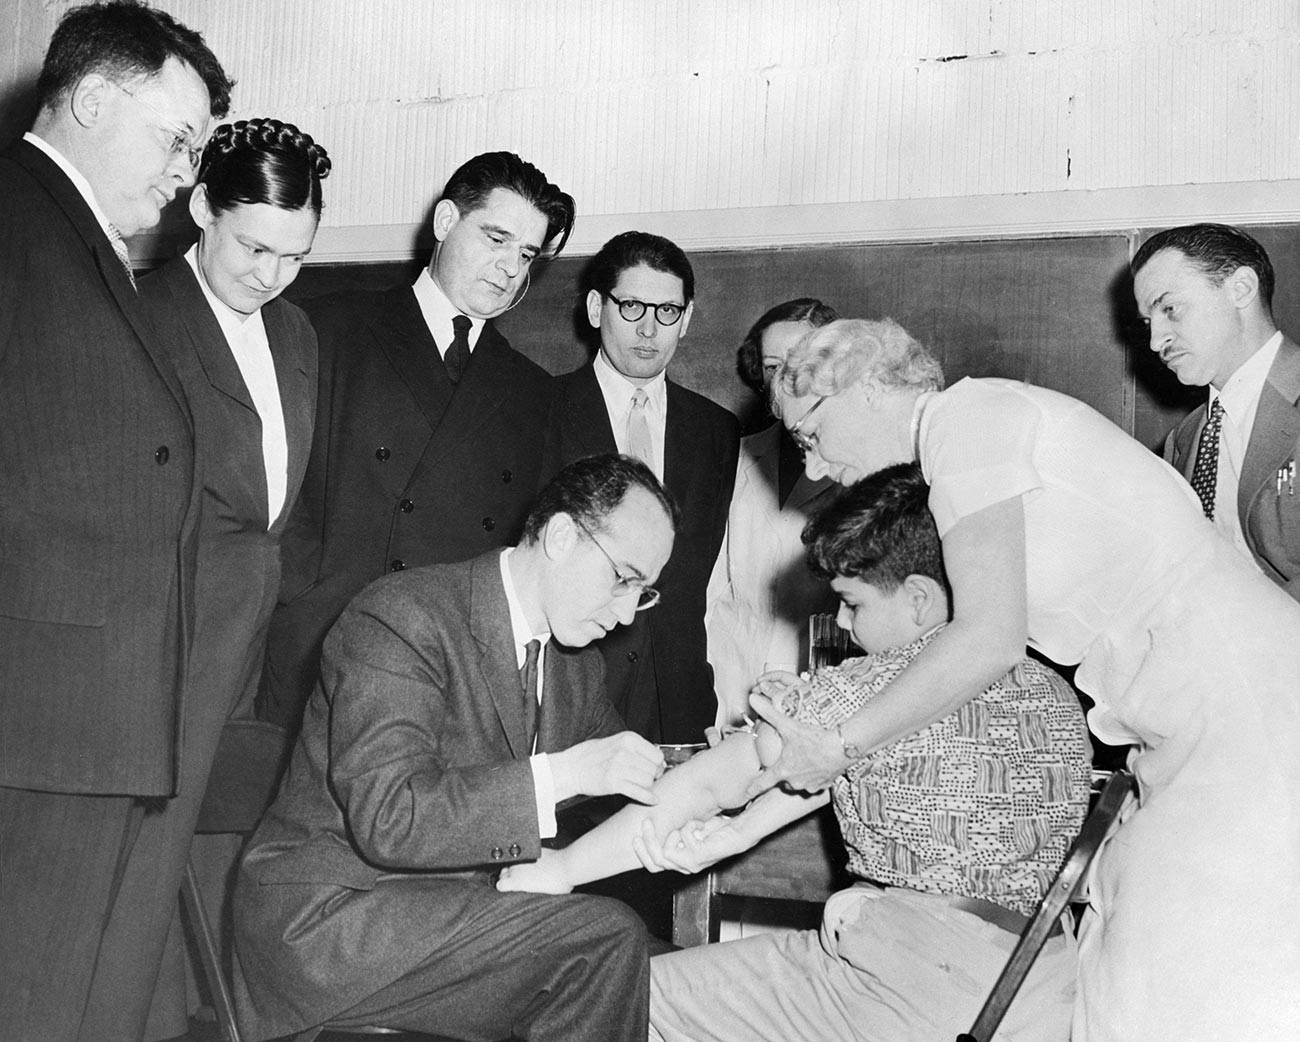 Russian scientists visiting the U. S. watch Dr. Jonas Salk administer a shot of his anti-polio vaccine to Paul Anolik,9